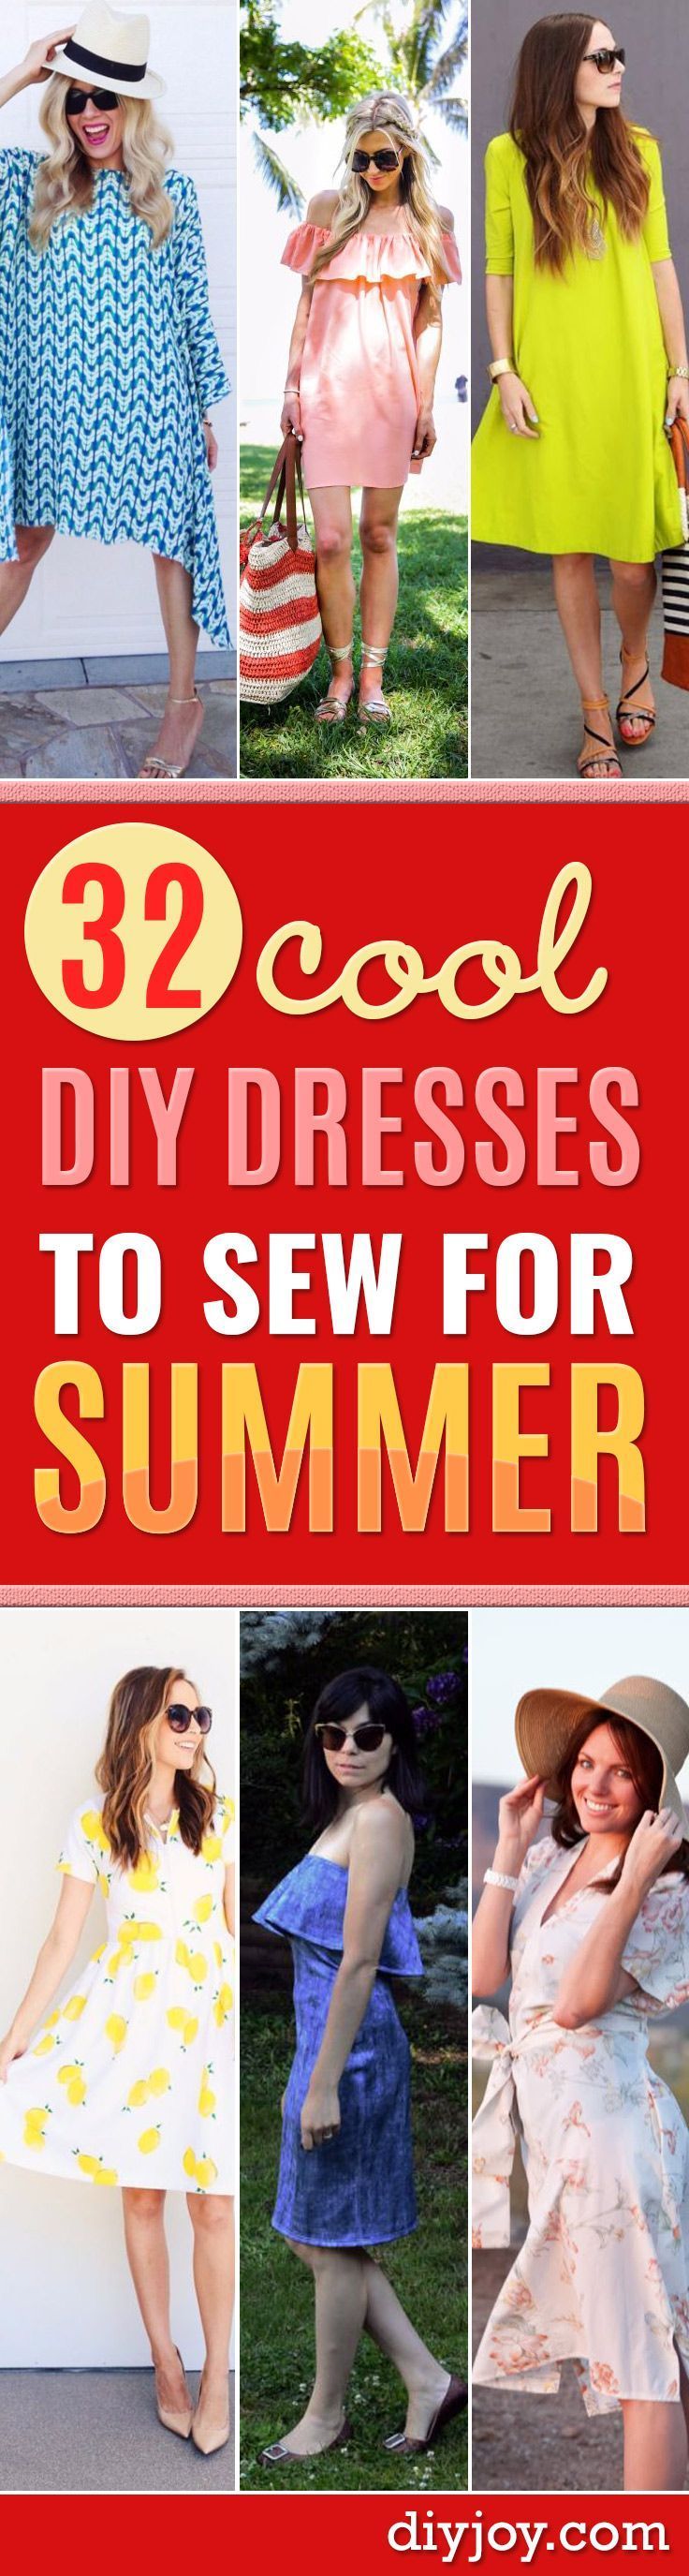 DIY Dresses to Sew for Summer – Best Free Patterns For Dress Ideas – Easy and Cheap Clothes to Make for Women and Teens – Step by